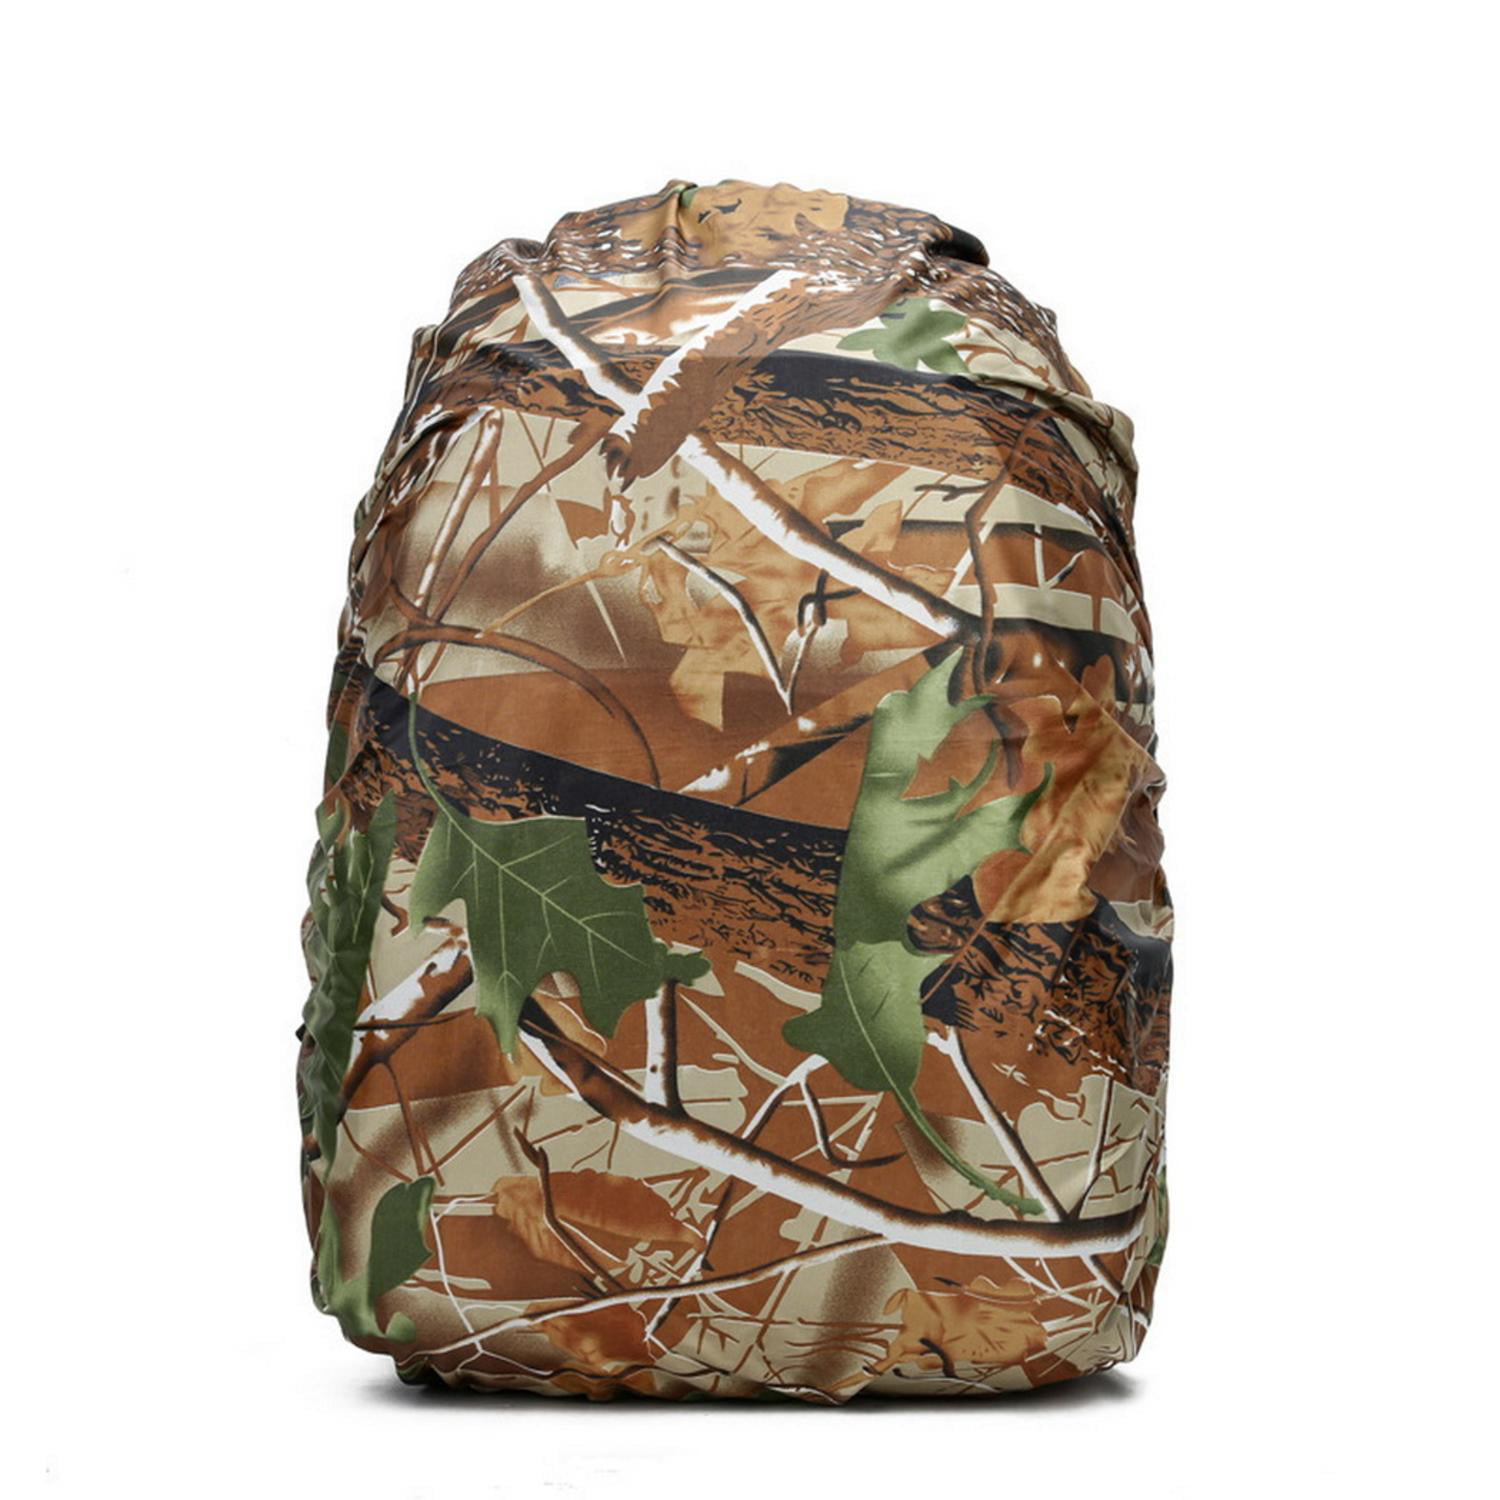 Backpack cover Camouflage Polyester Rainproof Waterproof Useful High Quality 